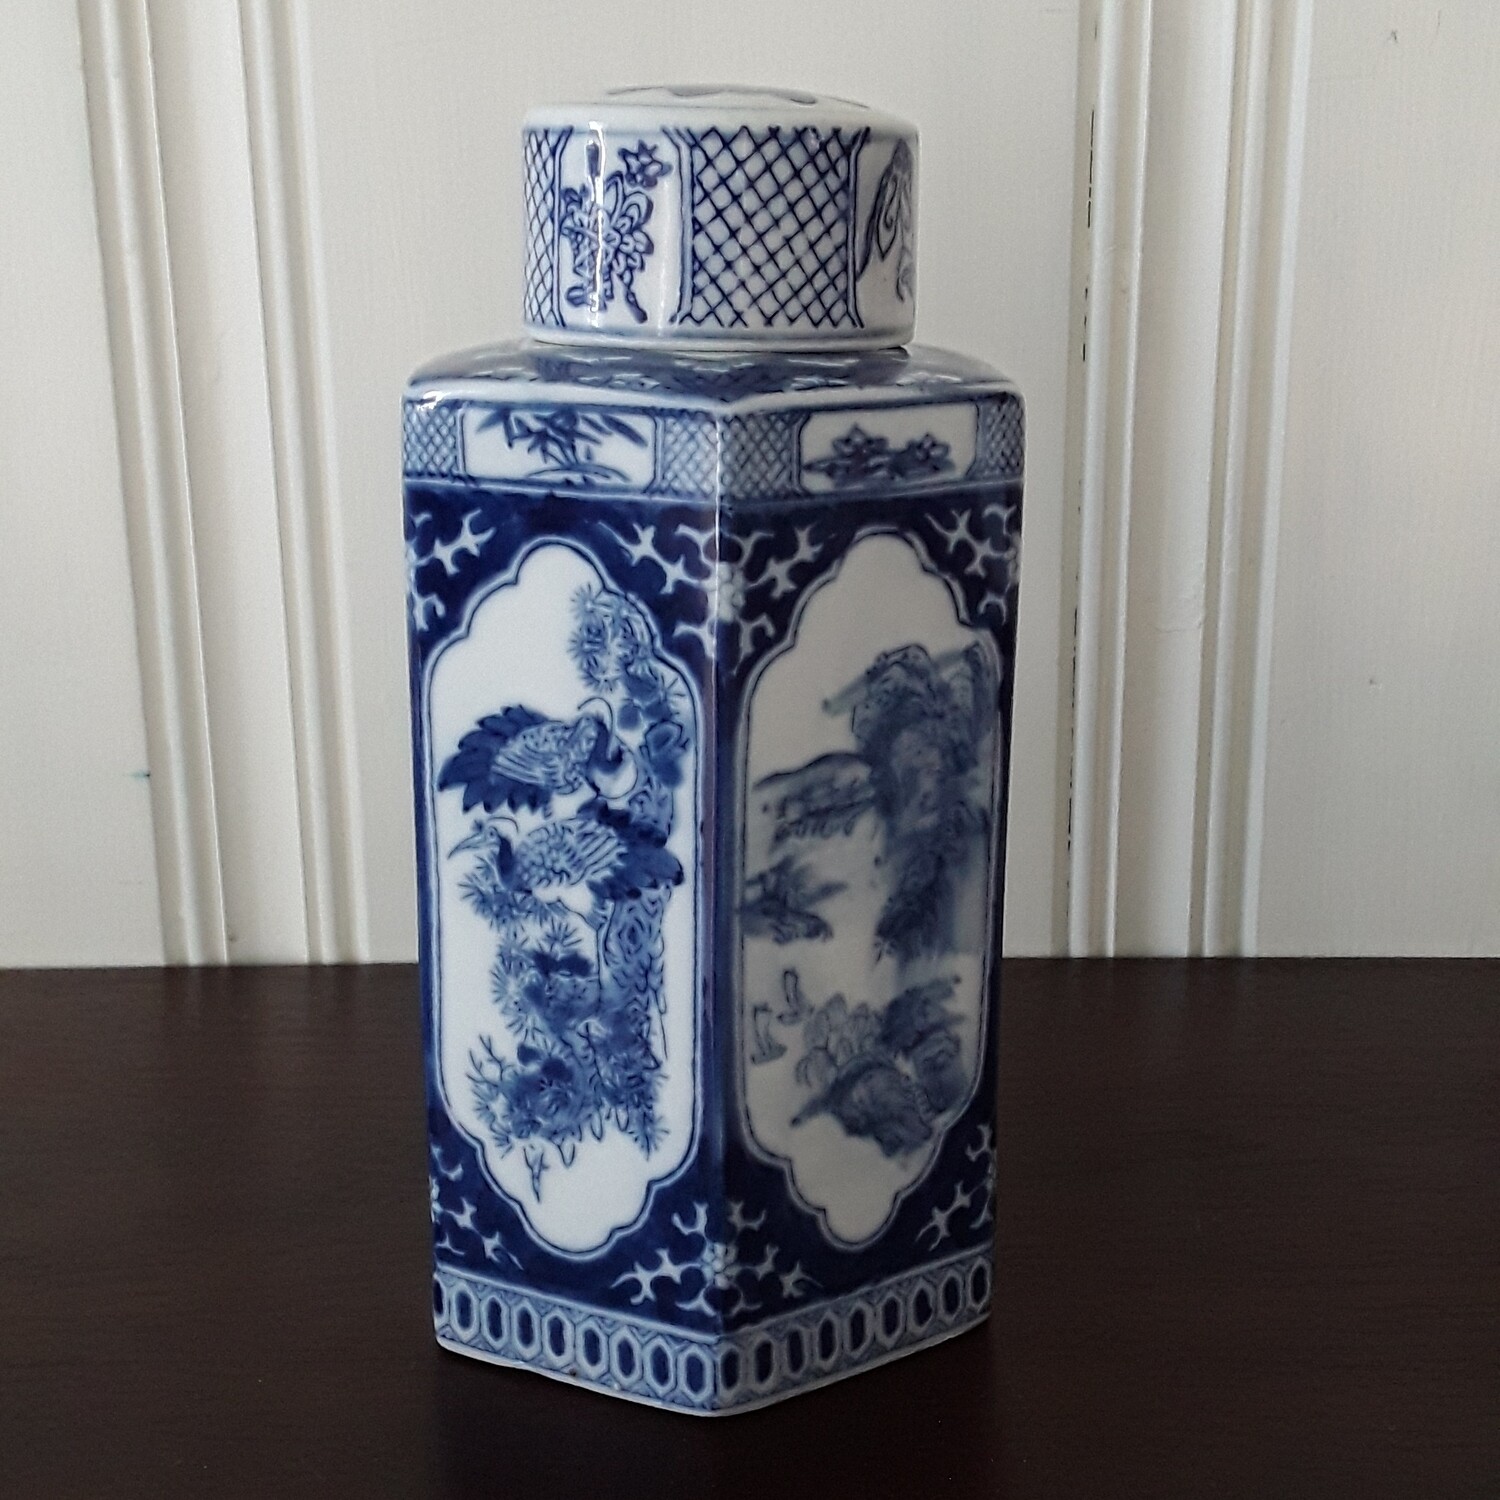 Vintage Blue and White Chinese Porcelain Hexagonal Tea Caddy